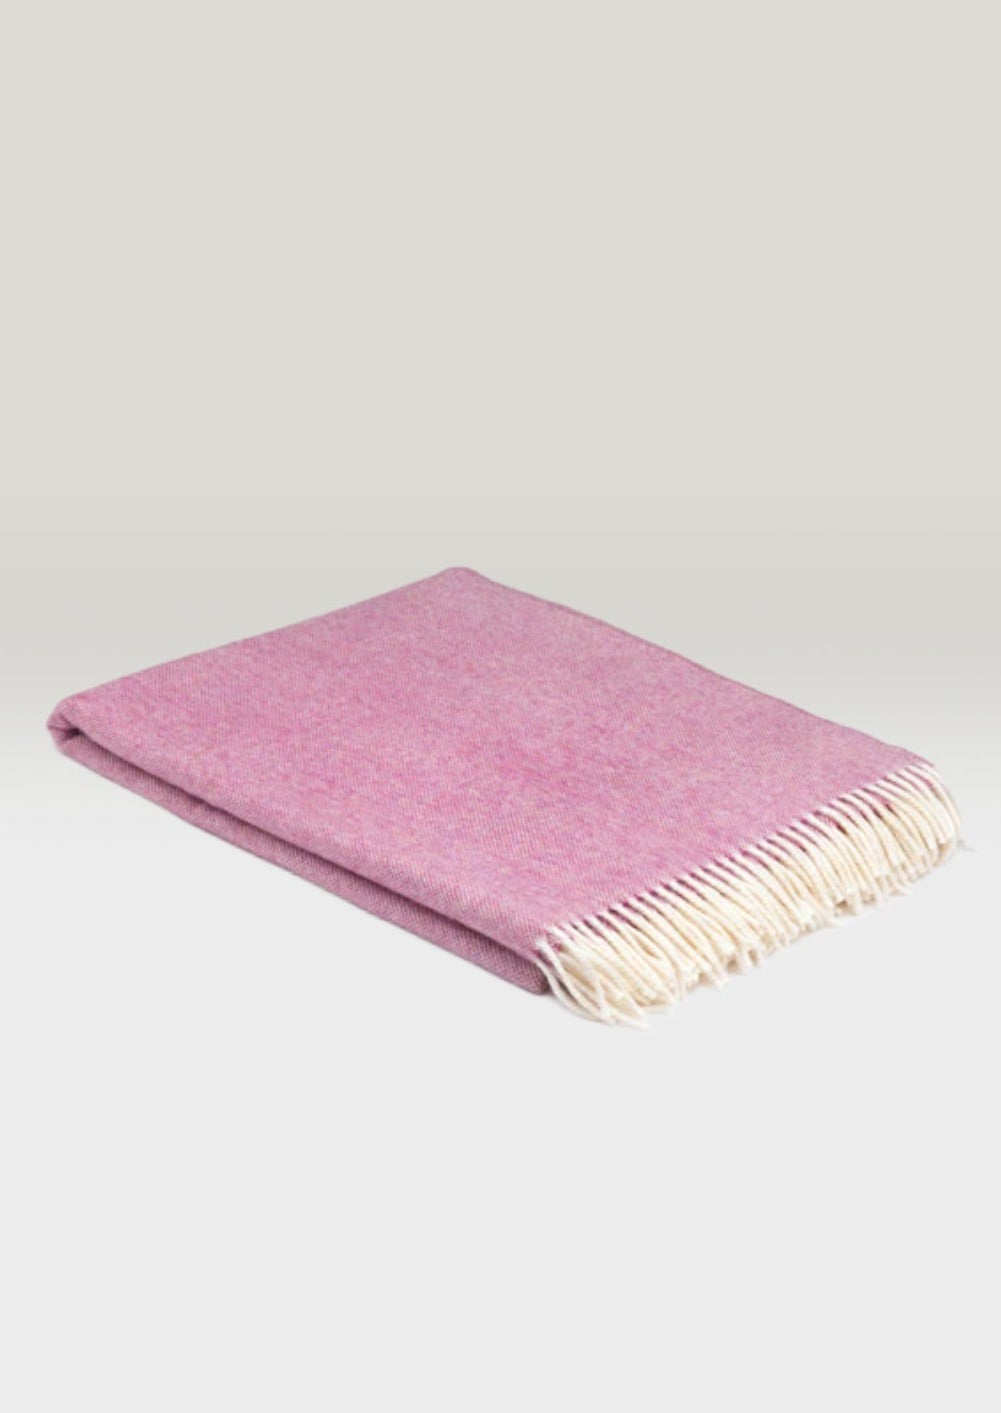 McNutt Spotted Cranberry Supersoft Blanket